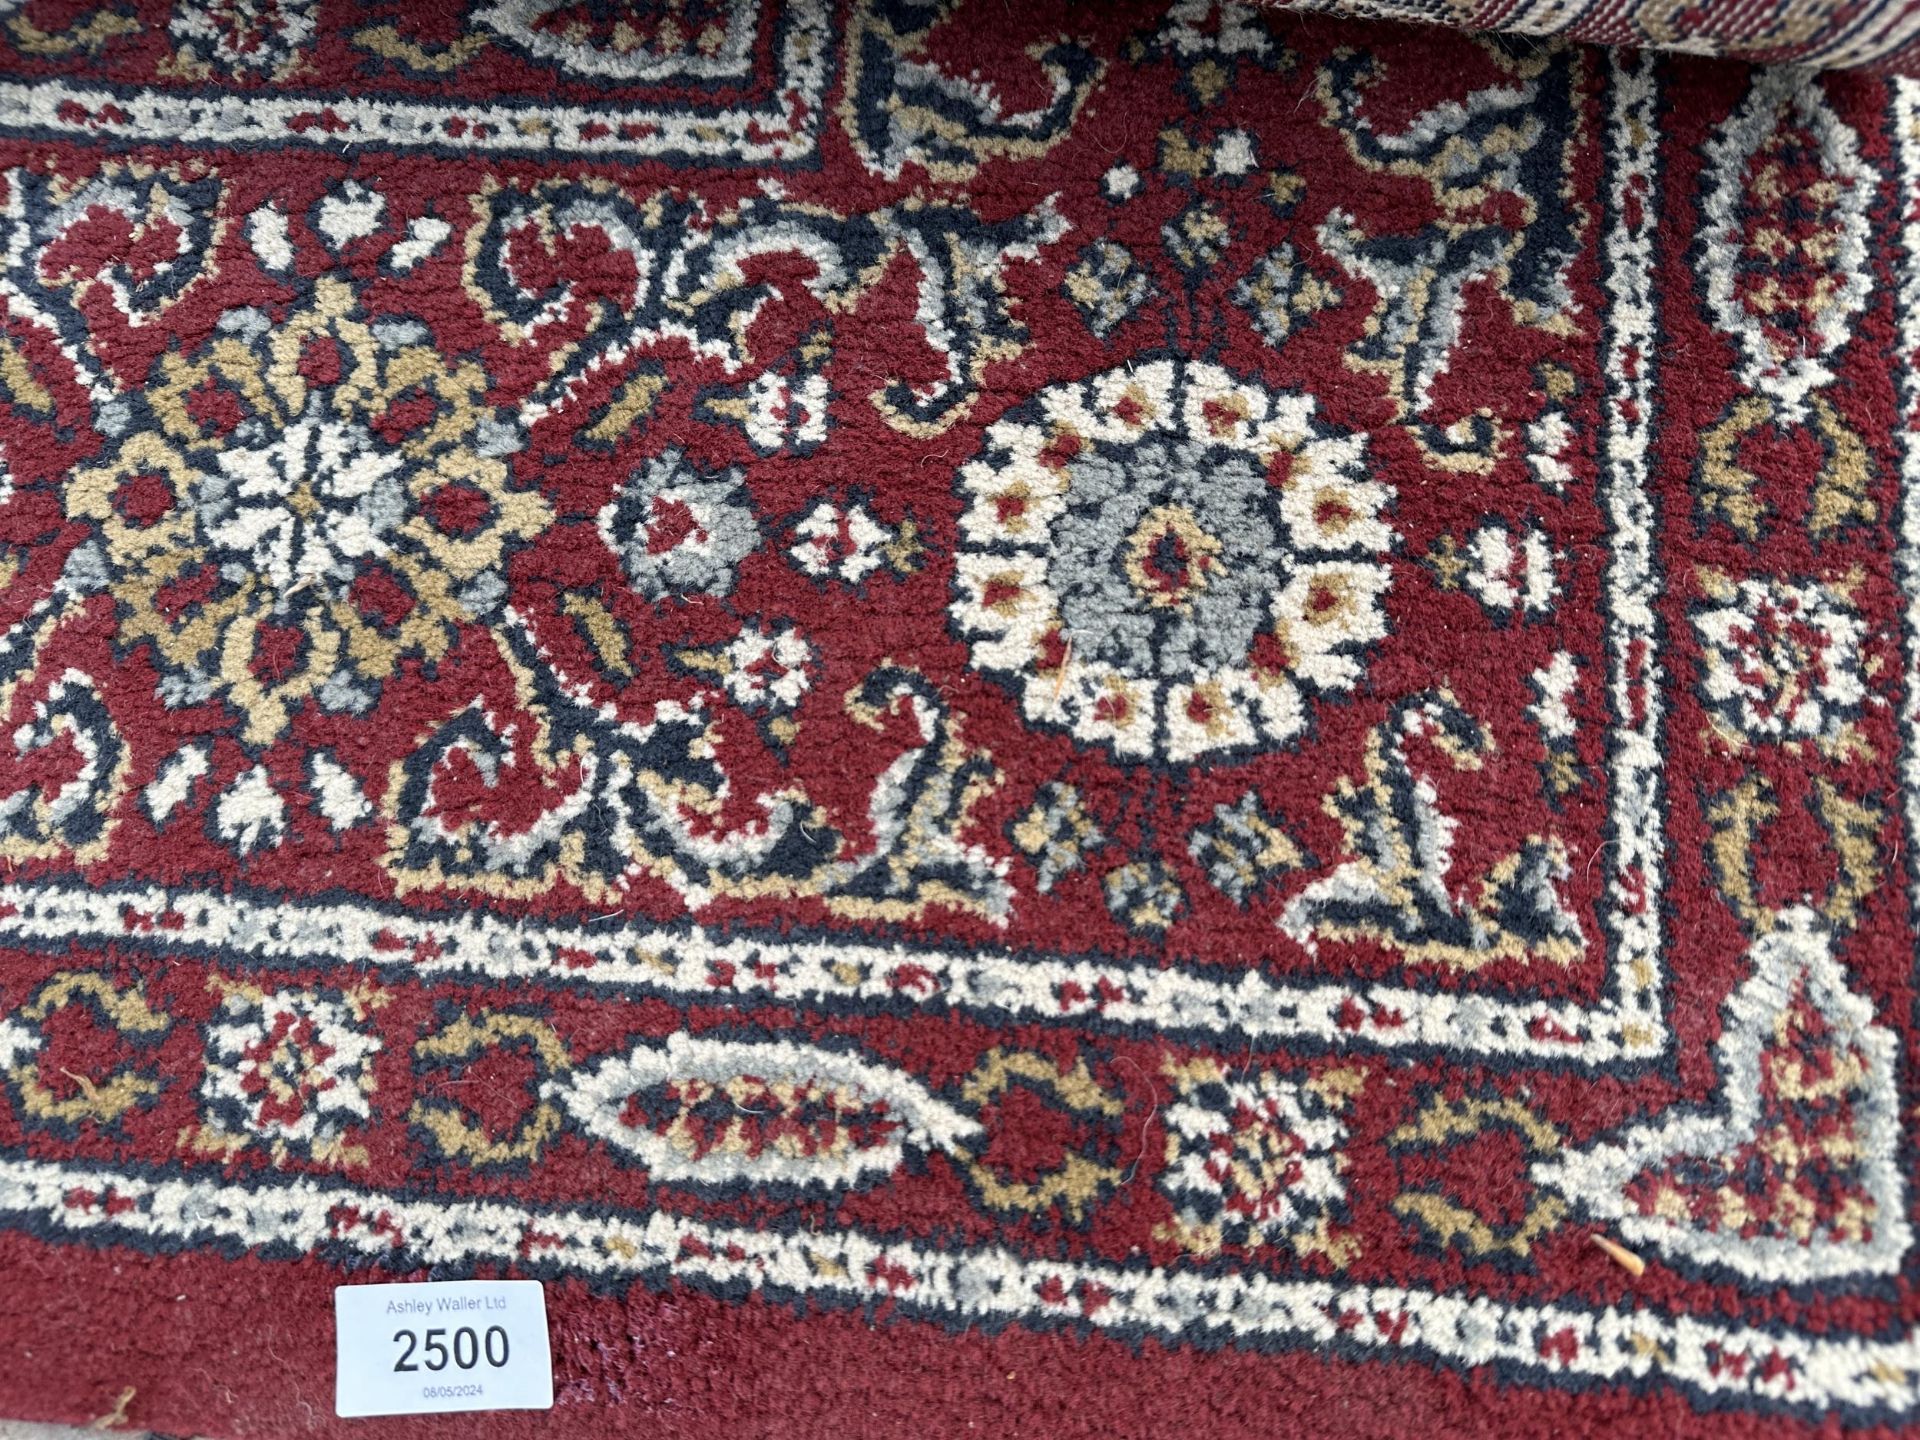 A RED PATTERNED RUG - Image 2 of 3